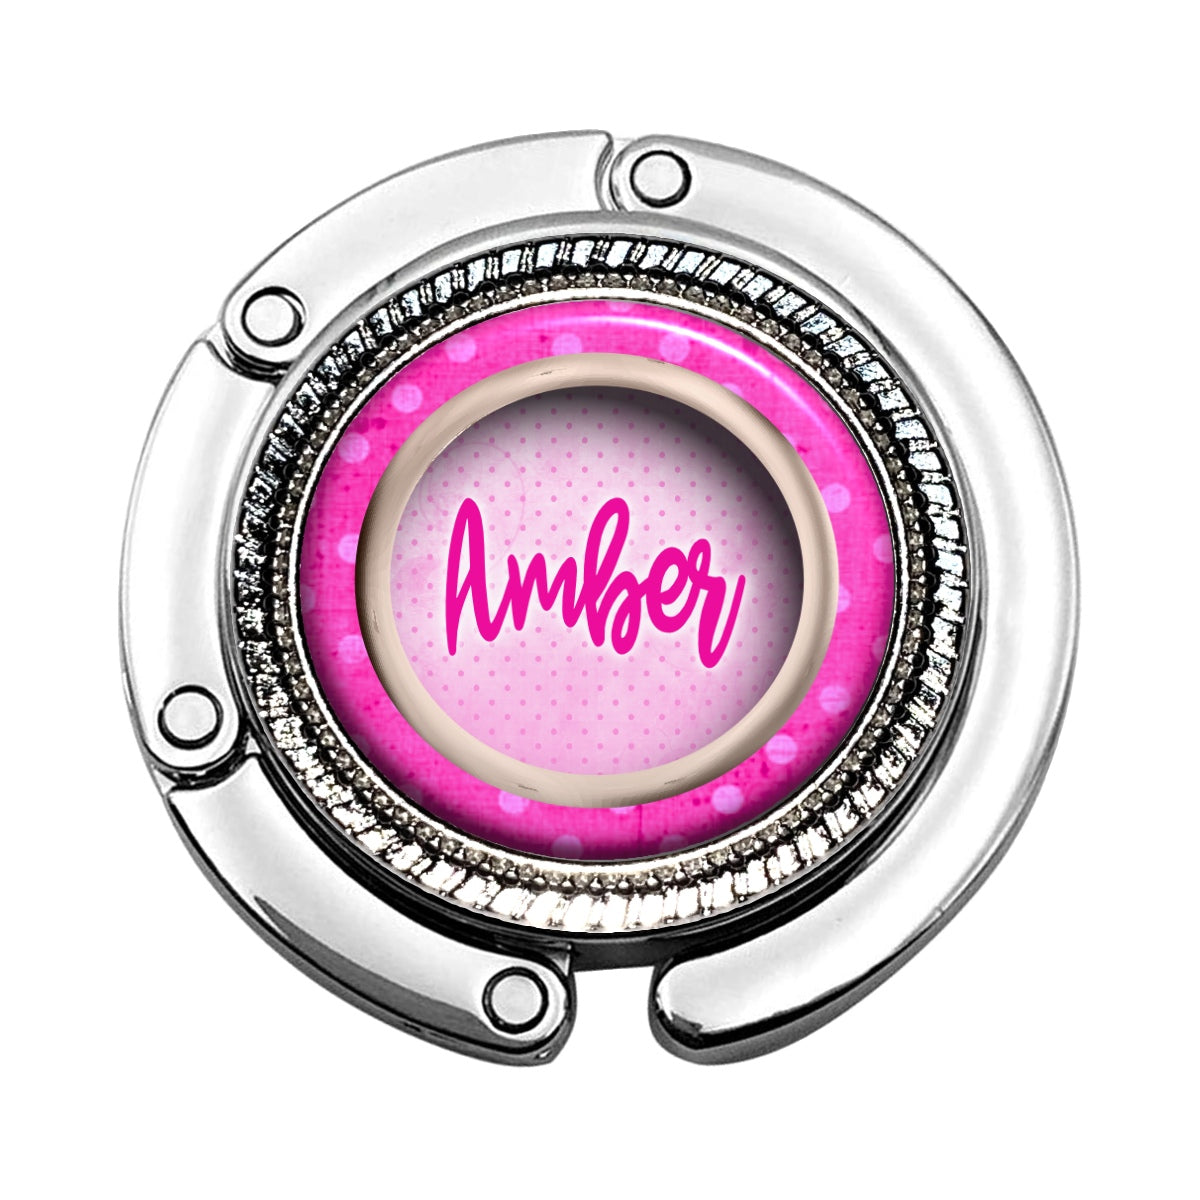 a pink and white object with the word amber on it